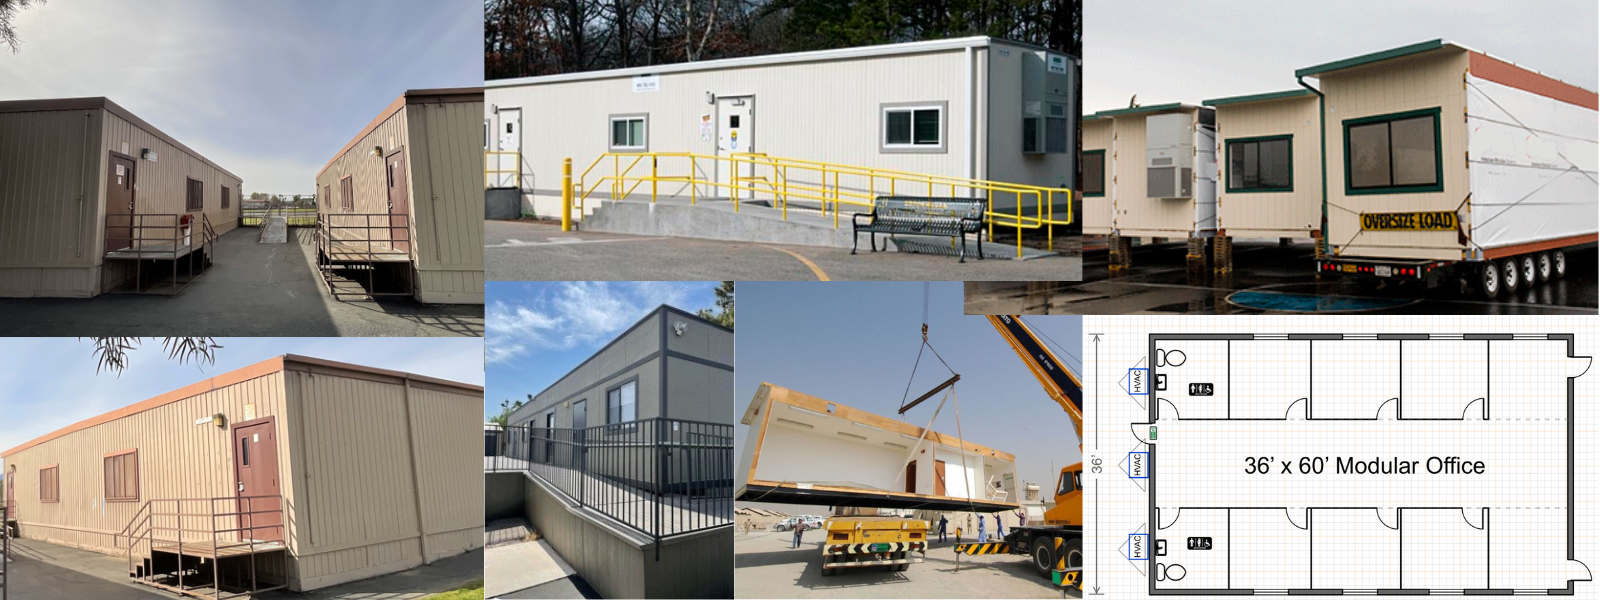 Here are the many uses for modular buildings and office trailers in the USA